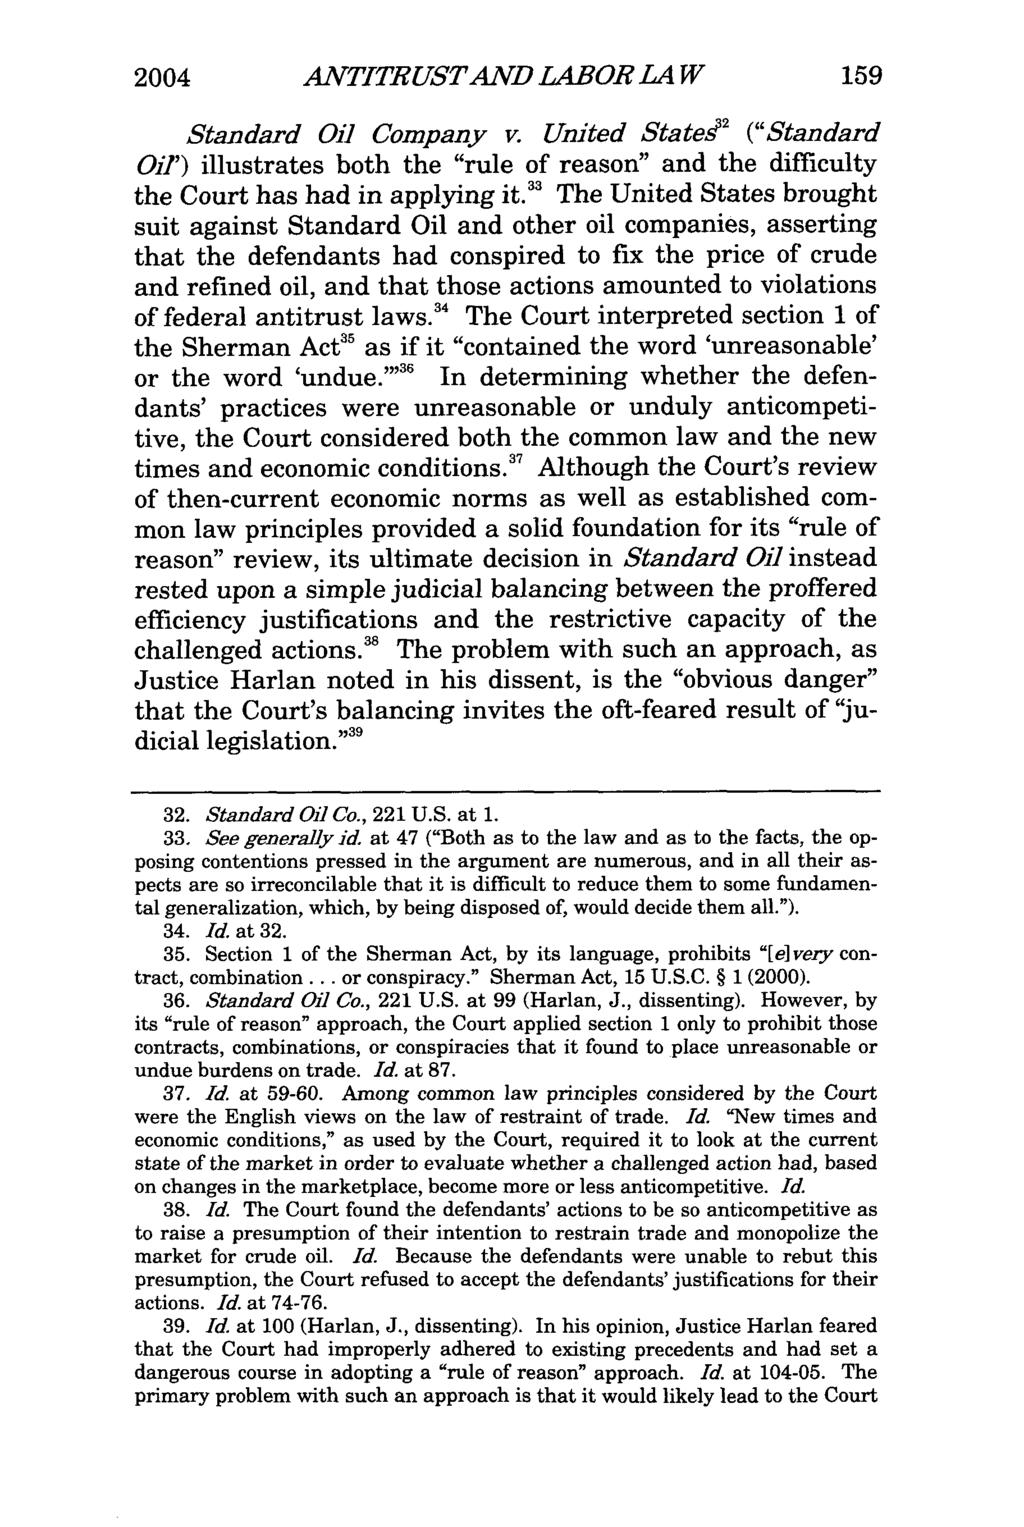 2004 ANTITRUSTAND LABOR LA W Standard Oil Company v. United StateP ("Standard Oil') illustrates both the "rule of reason" and the difficulty the Court has had in applying it.